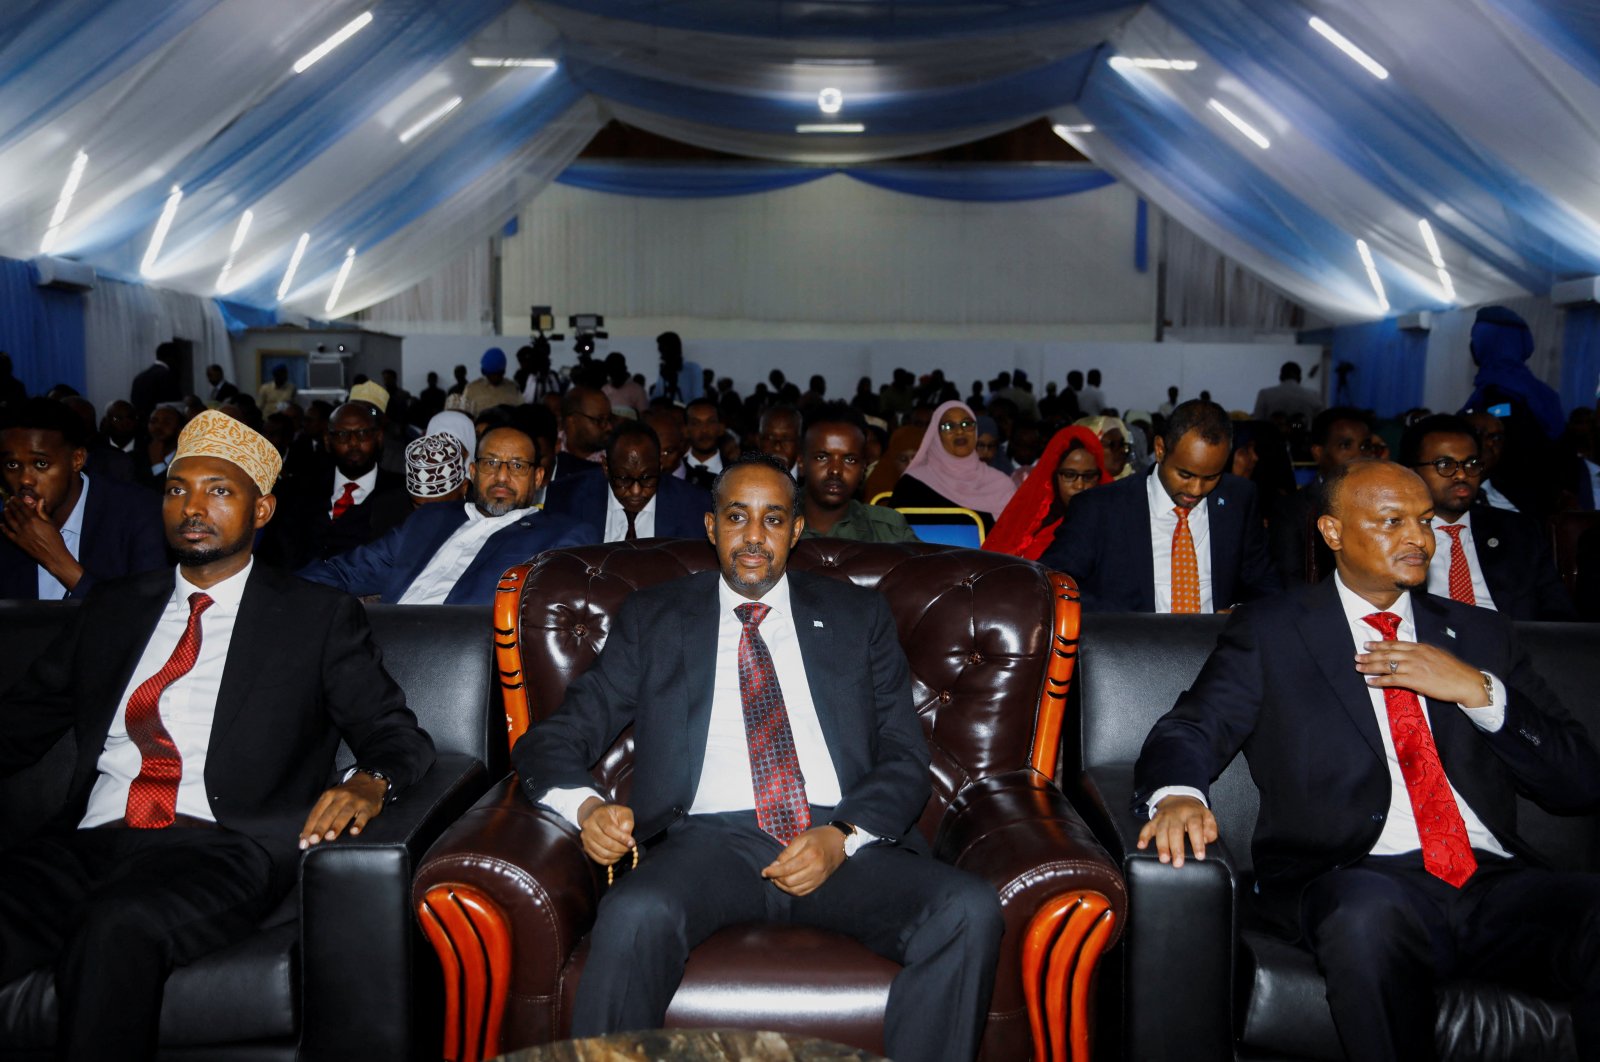 Somalia&#039;s Prime Minister Mohamed Hussein Roble (C) attends the swearing-in ceremony of the newly elected lawmakers at an election hall in capital Mogadishu, Somalia, April 14, 2022. (Reuters Photo)